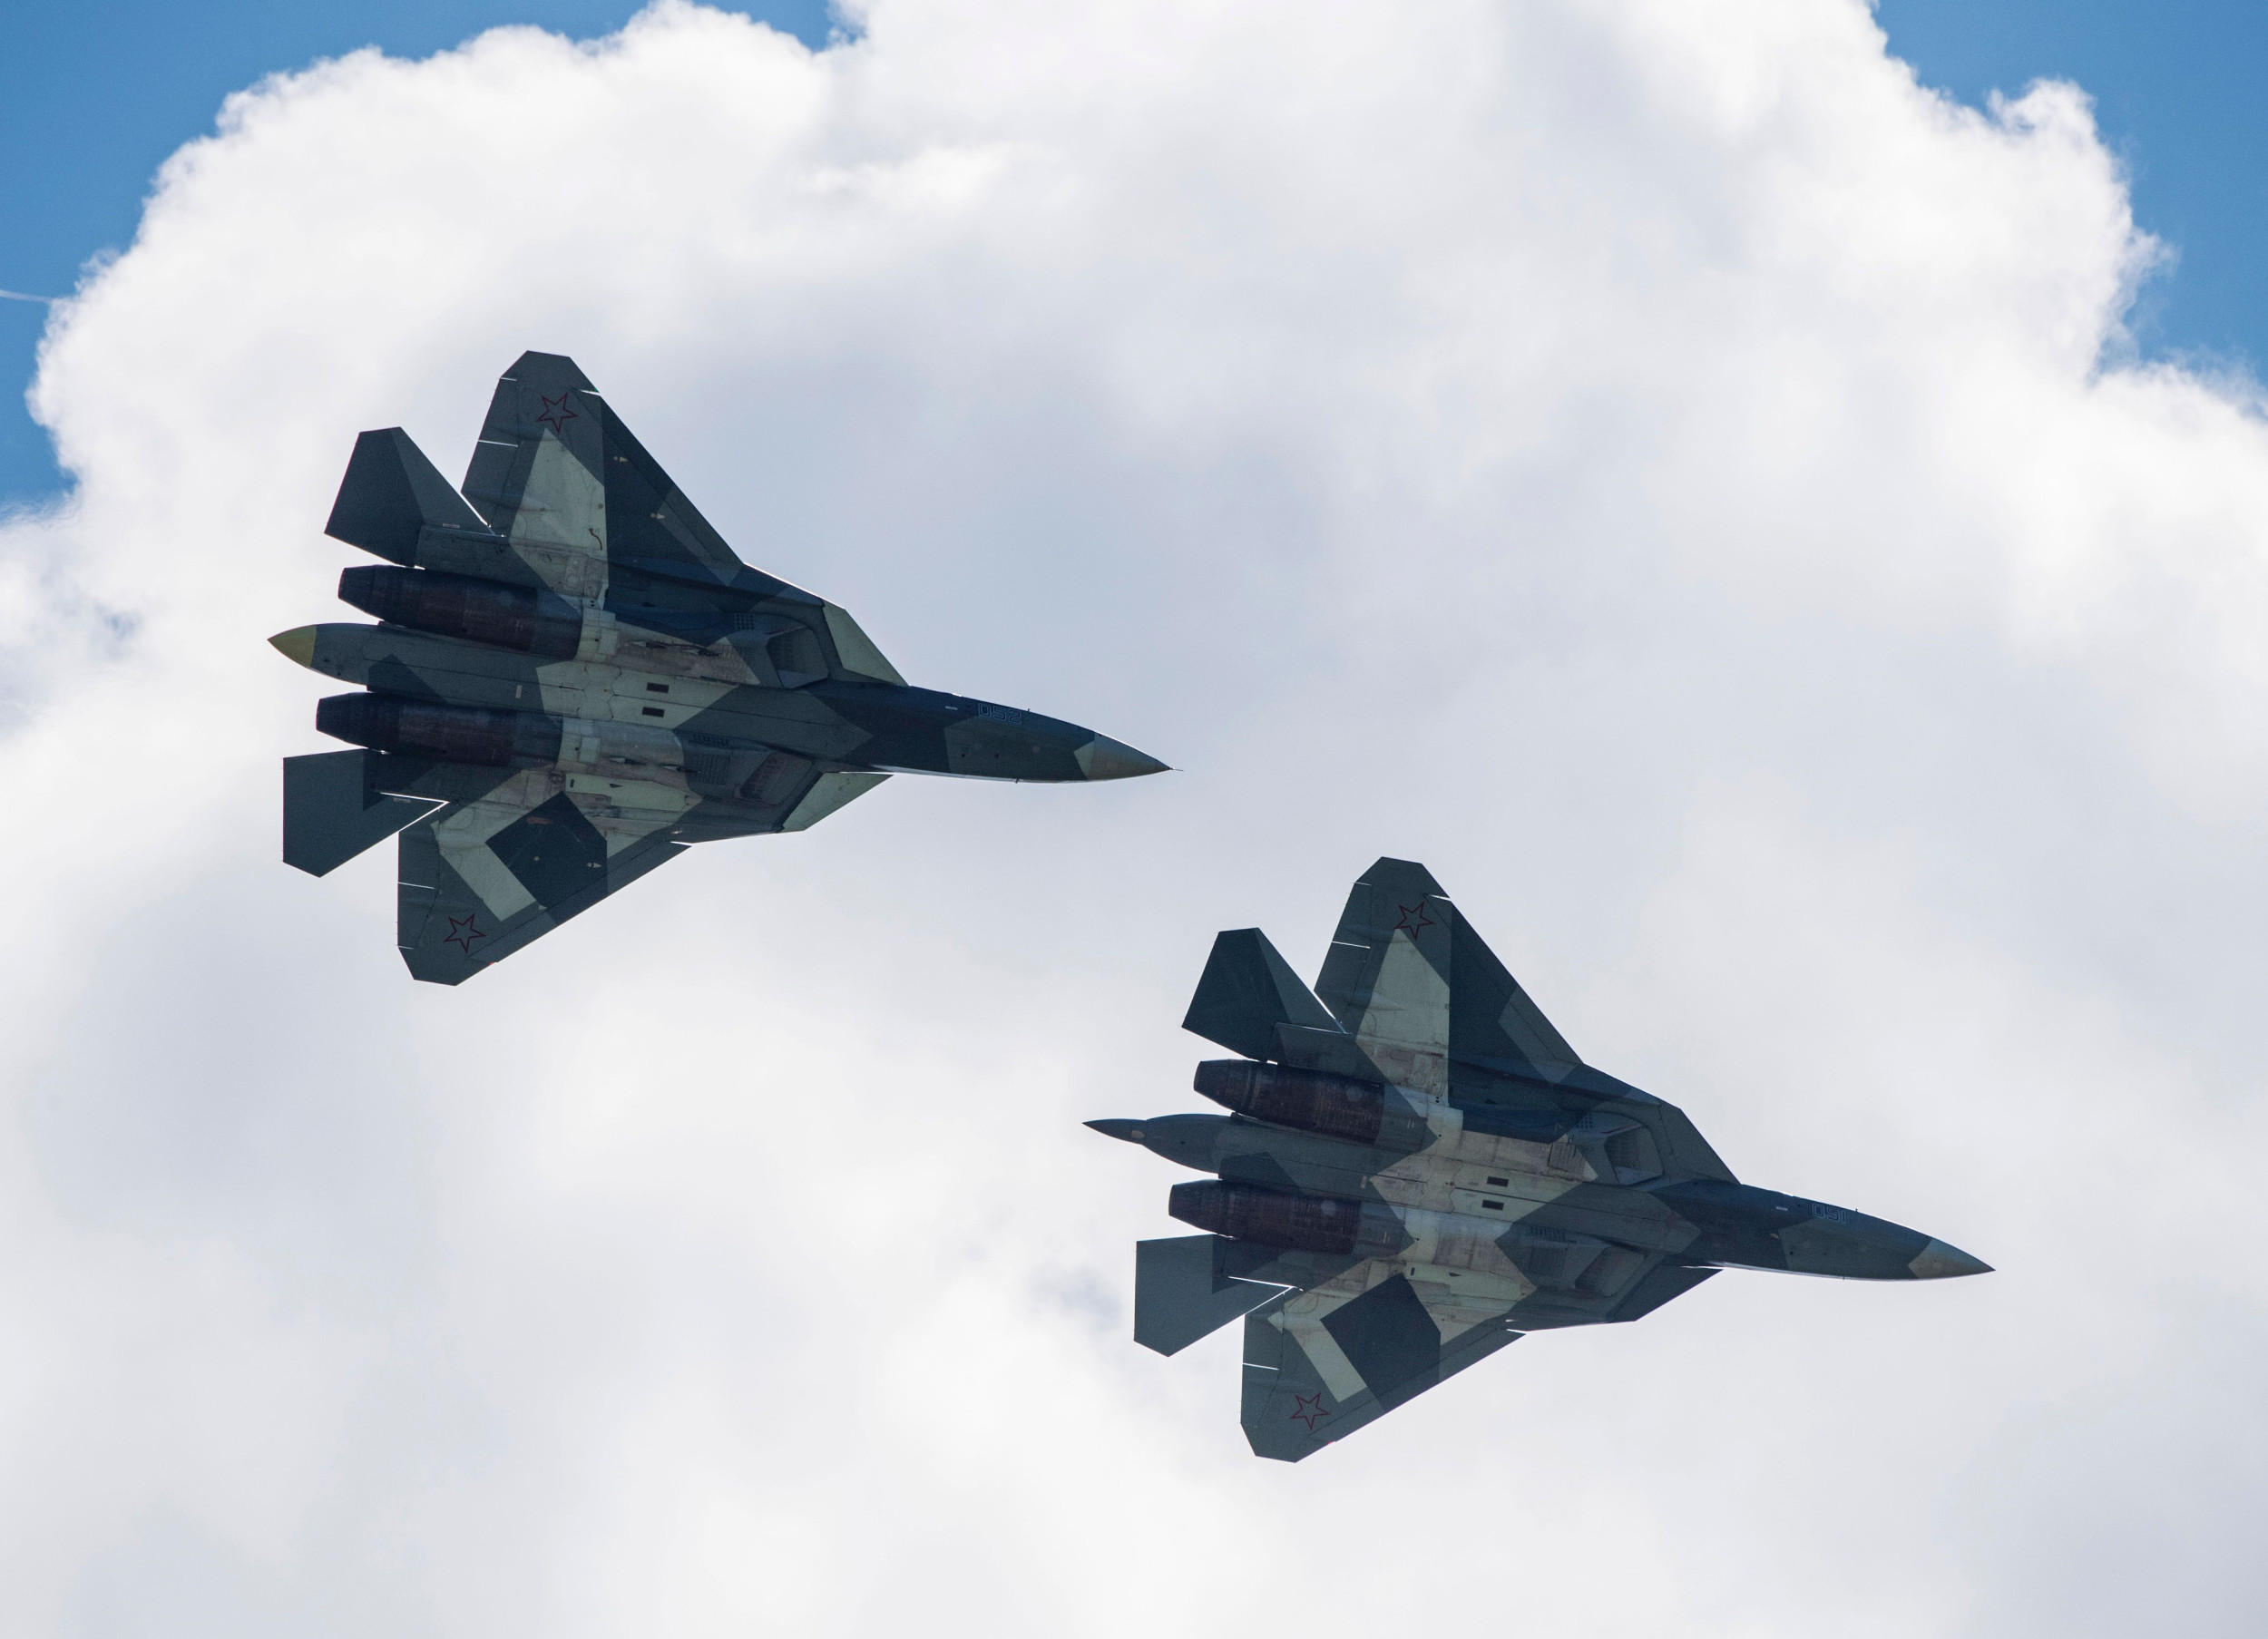 russia loses two su-34 fighter bombers and an su-35 jet in a day: ukraine